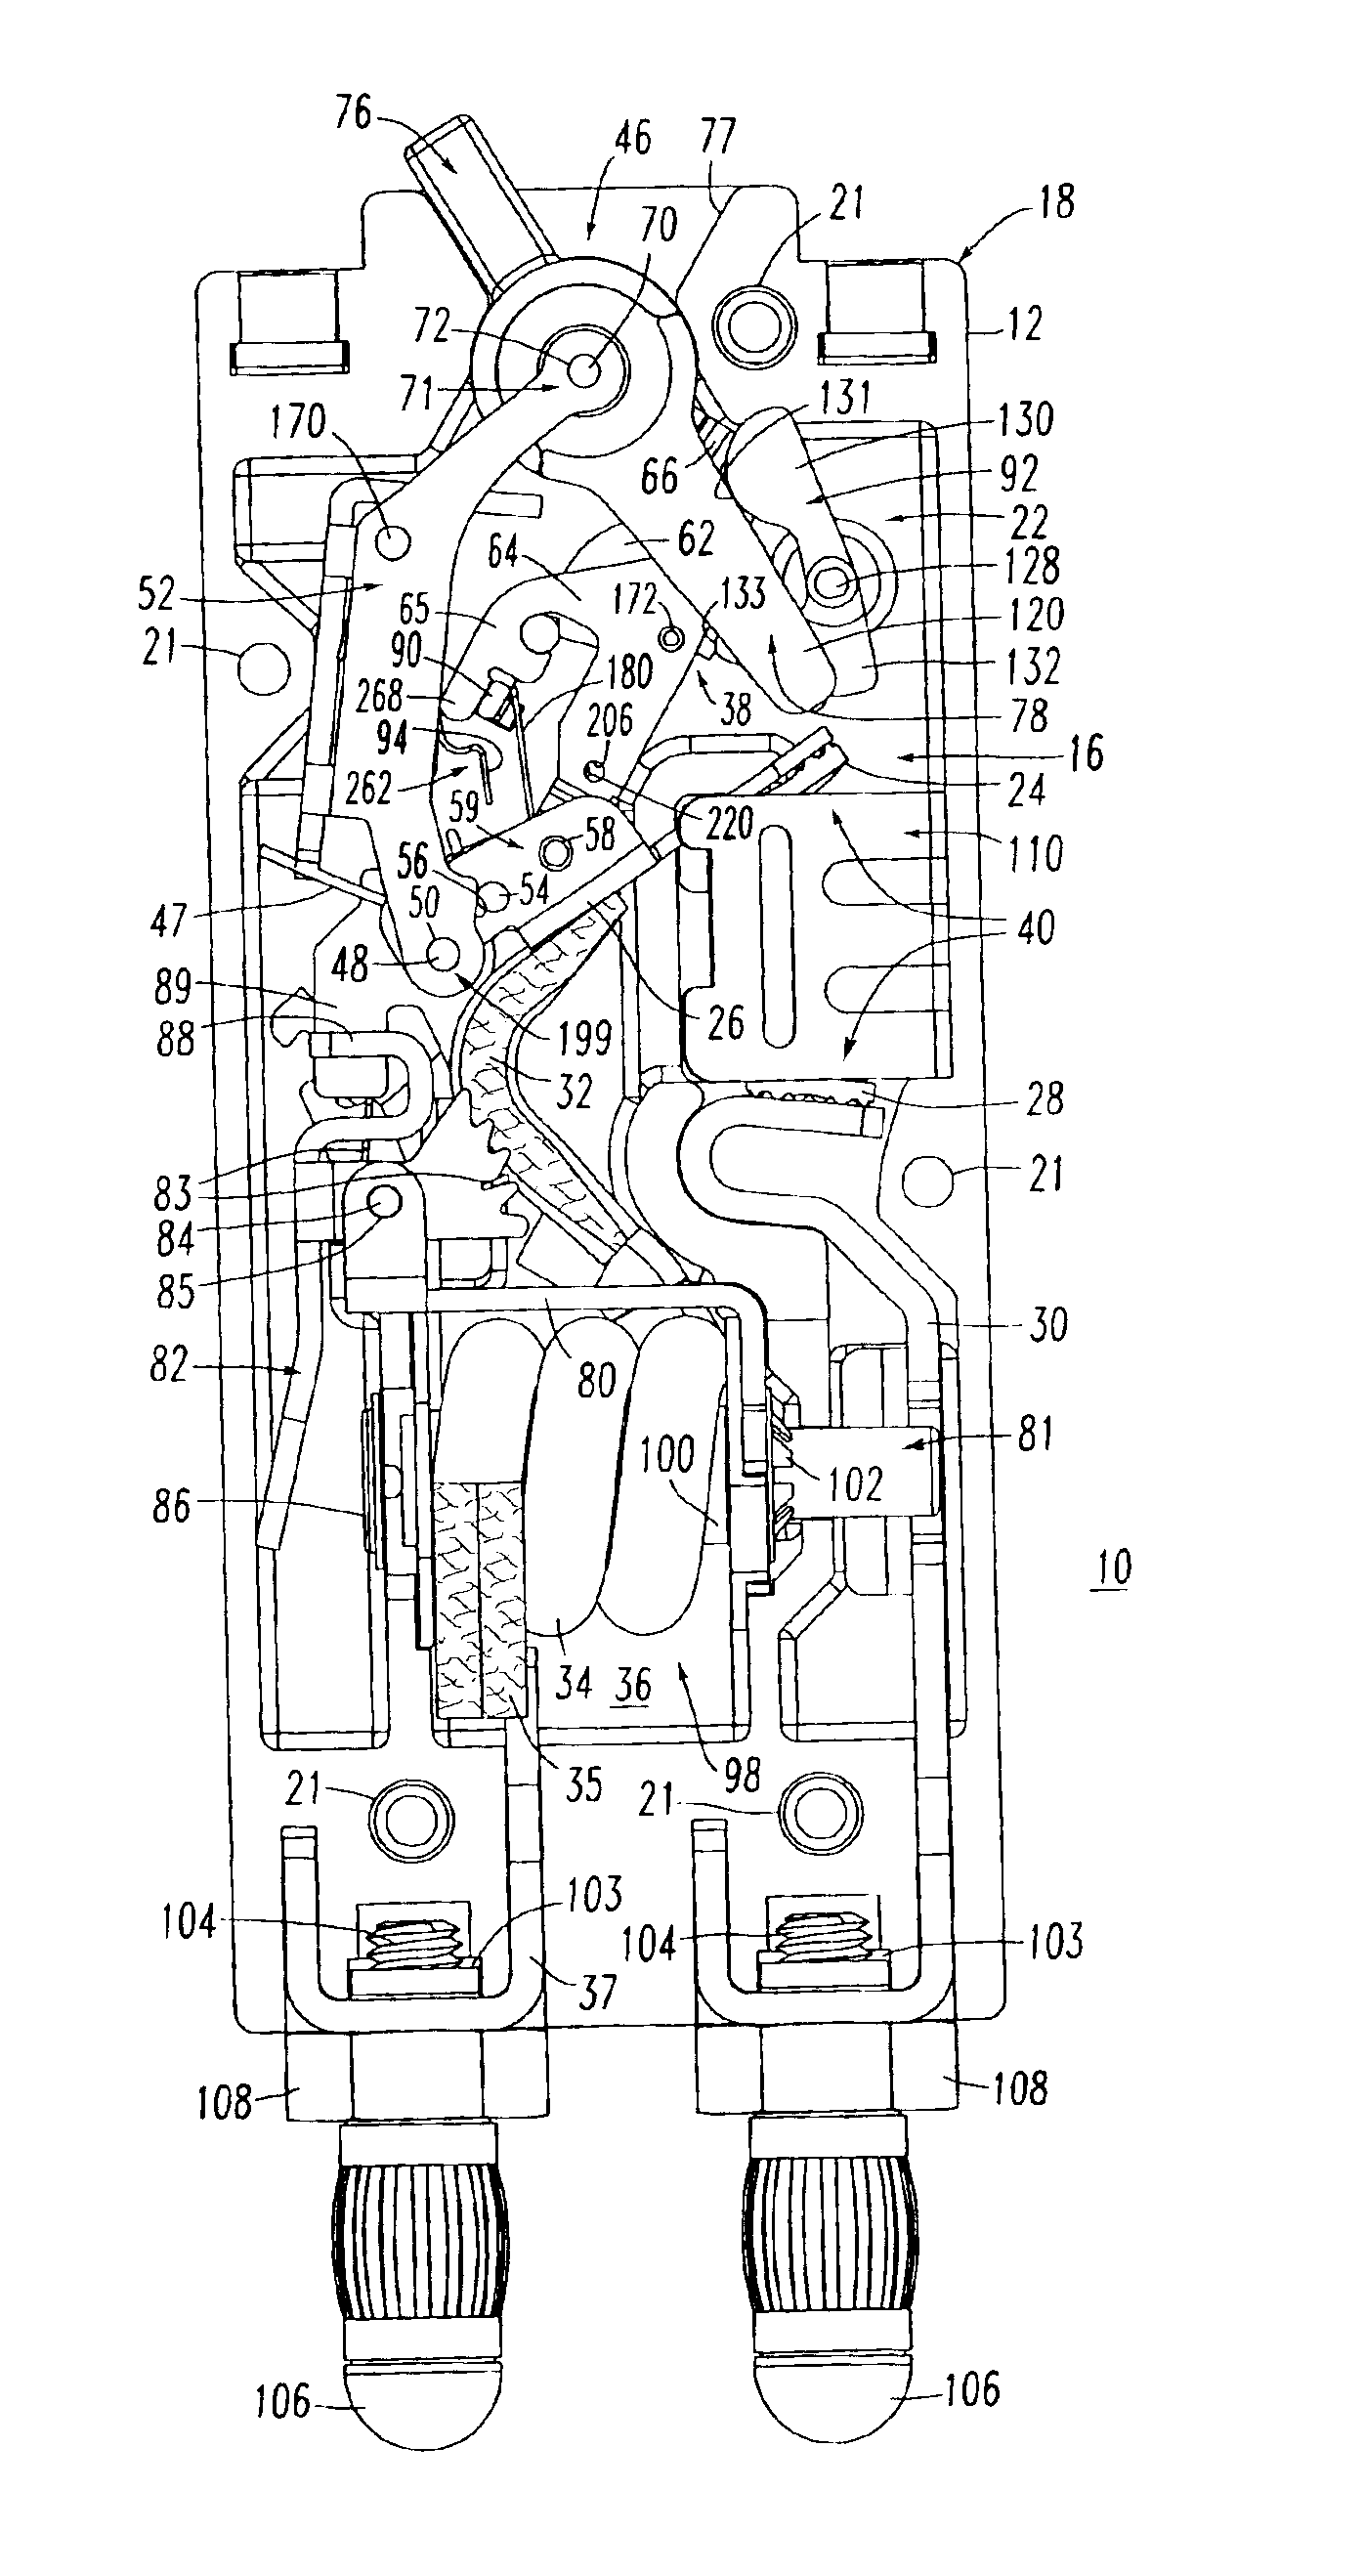 Circuit breaker including operating handle having one or more operating arms and extension springs